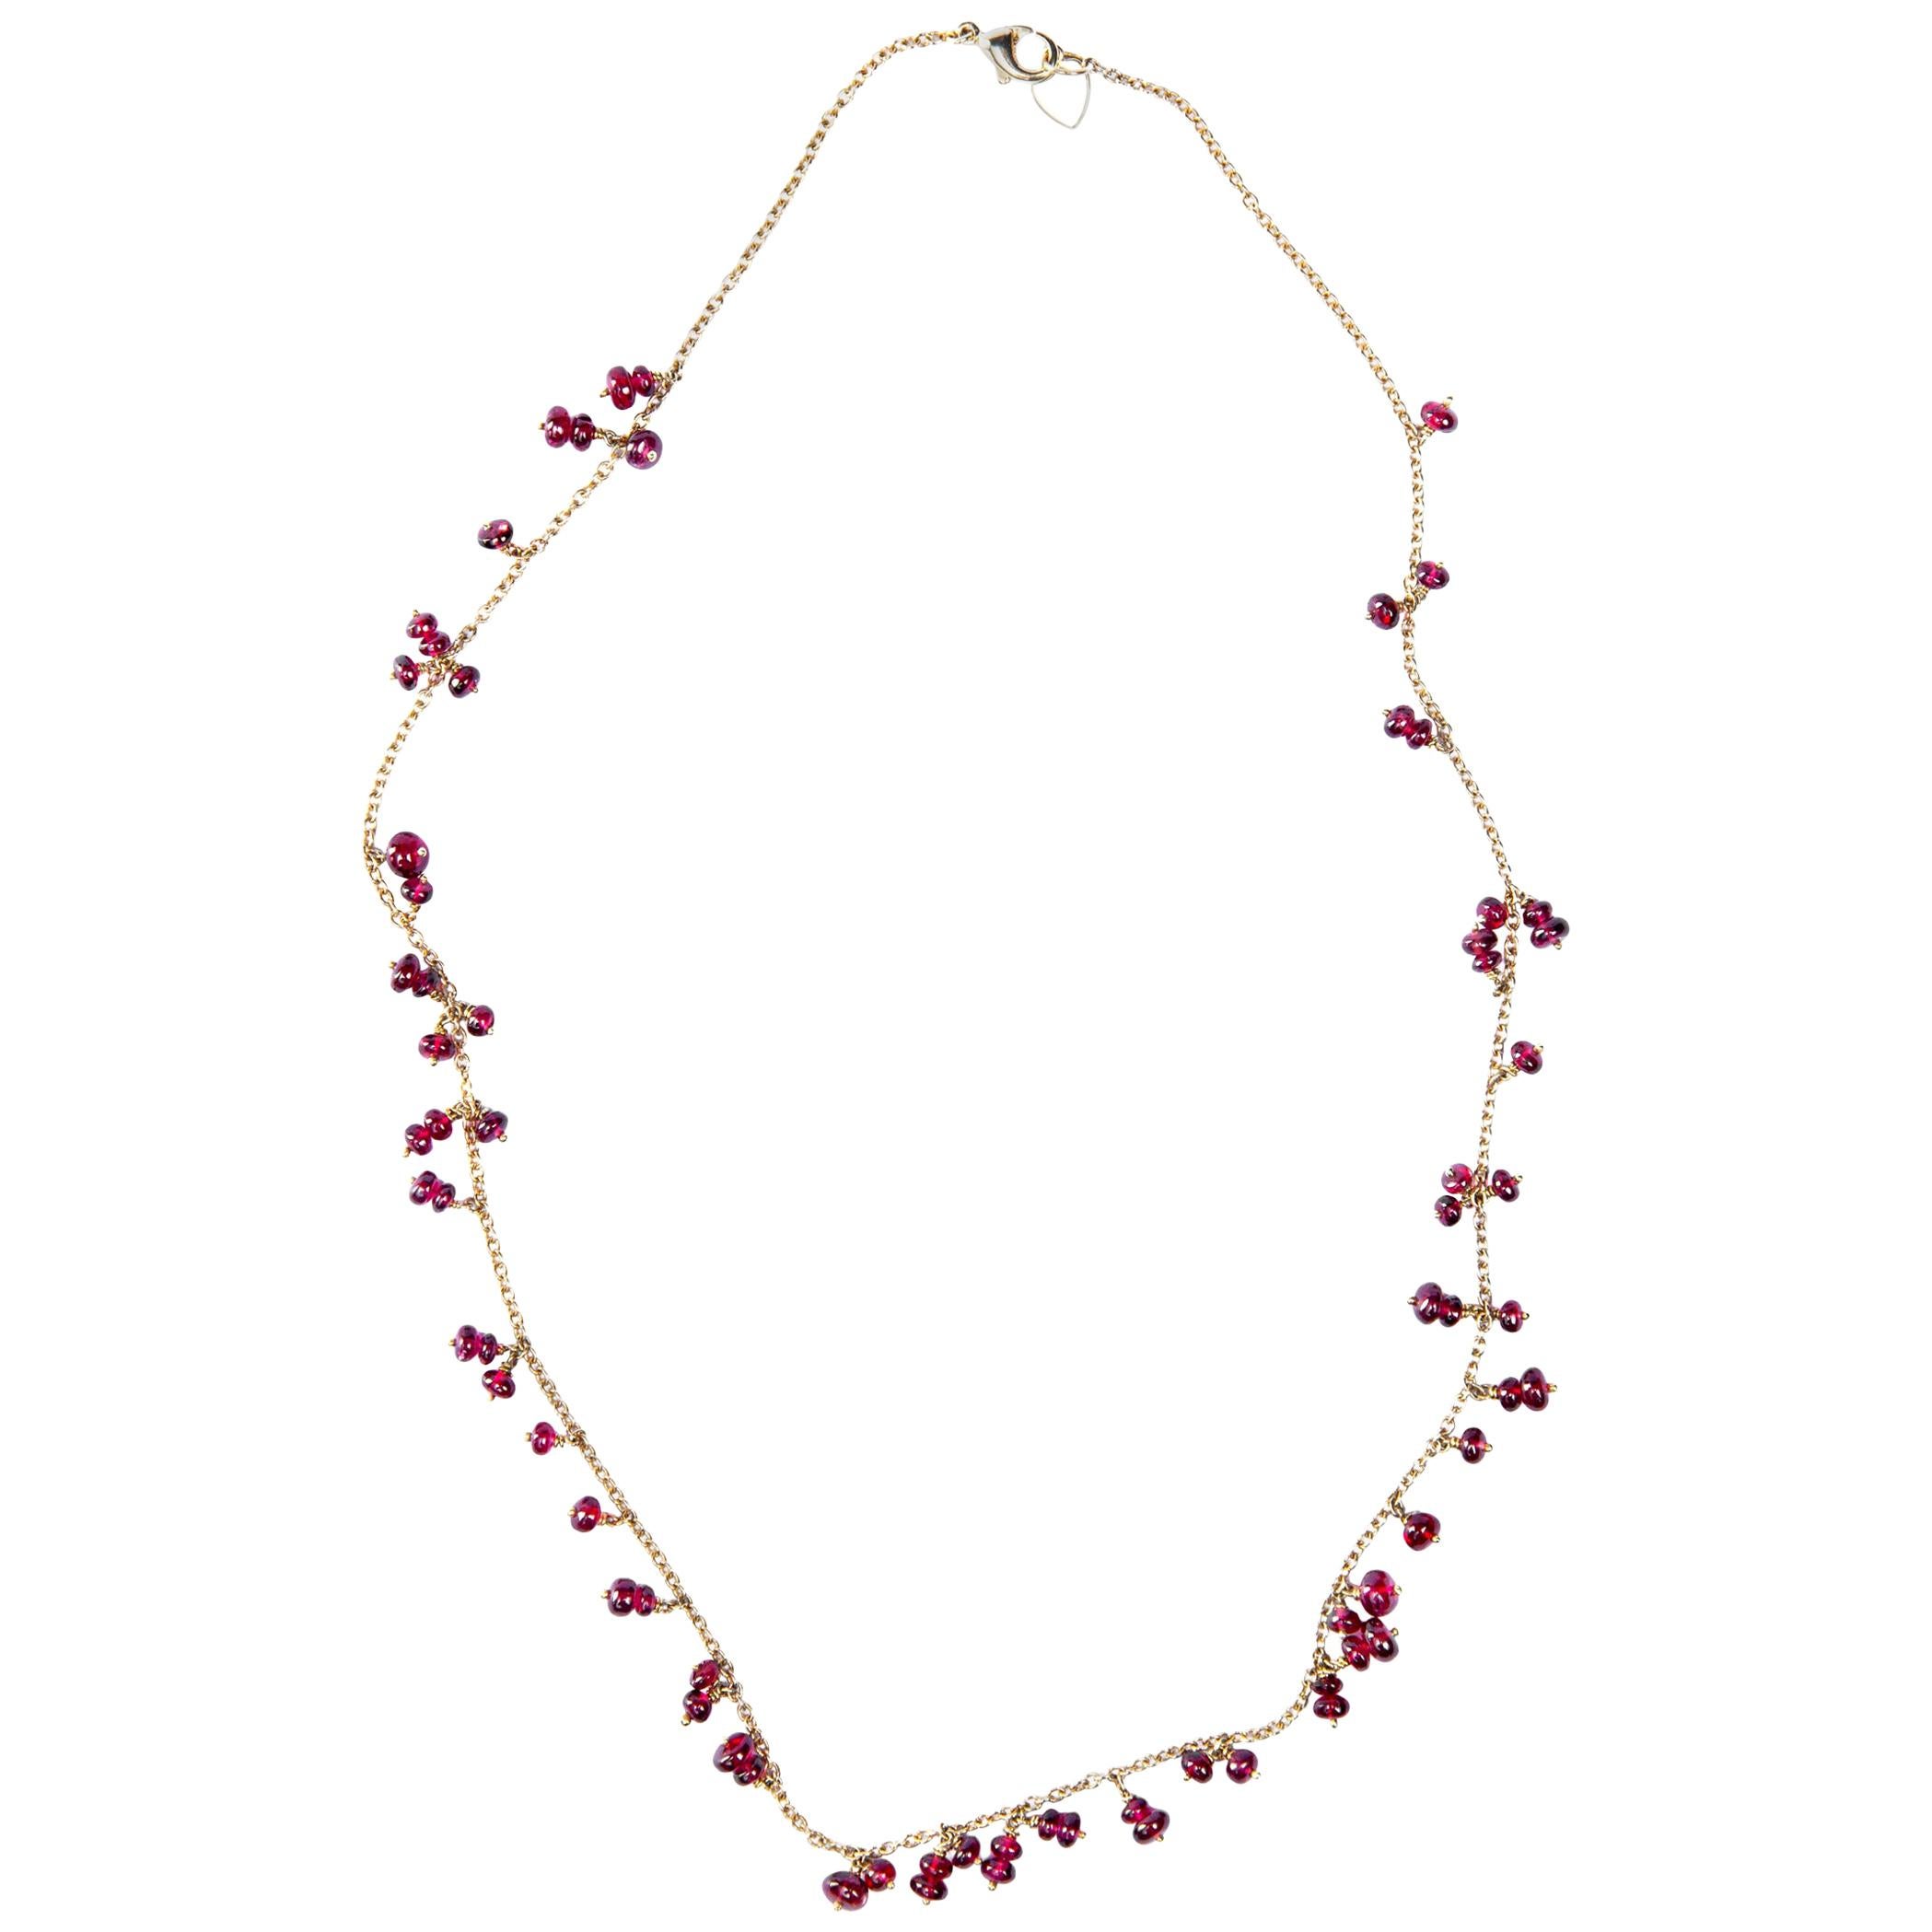 Alex Jona design collection, hand crafted in Italy, 18 karat yellow gold chain necklace, featuring 22.10 carats of Burmese Red Spinels, cabochon beads.  
Dimensions: L 17.71 in/ 45 cm X D 0.18 in/ 4,6 mm

Alex Jona jewels stand out, not only for